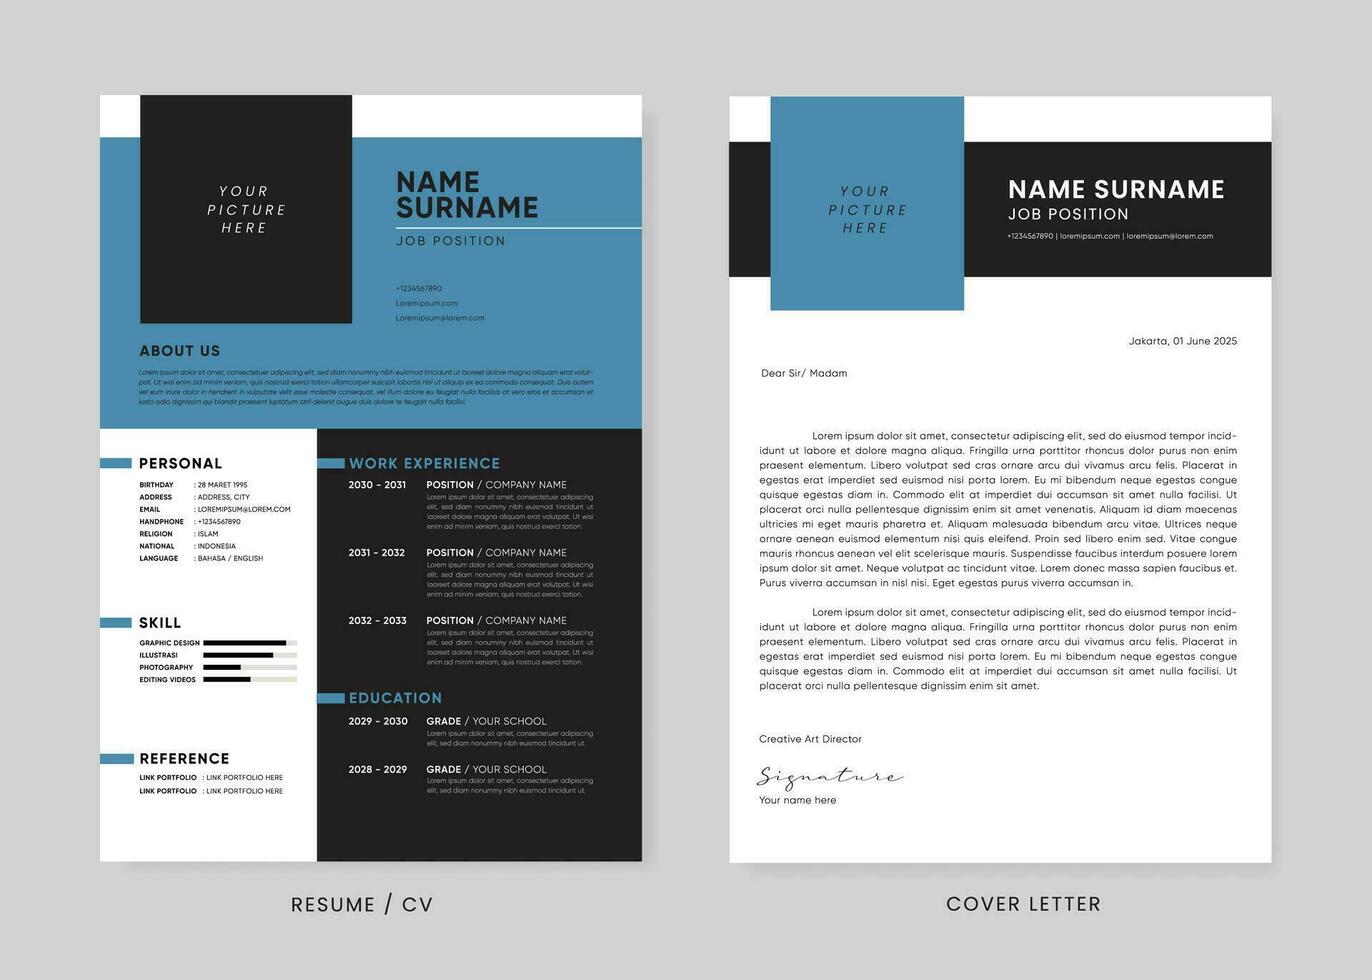 Minimalist CV Resume and Cover Letter Design Template. Curriculum Vitae Clean and Clear Professional Modern Design. Stylish Minimalist Elements and Icons with blue and black Color - Vector Template.